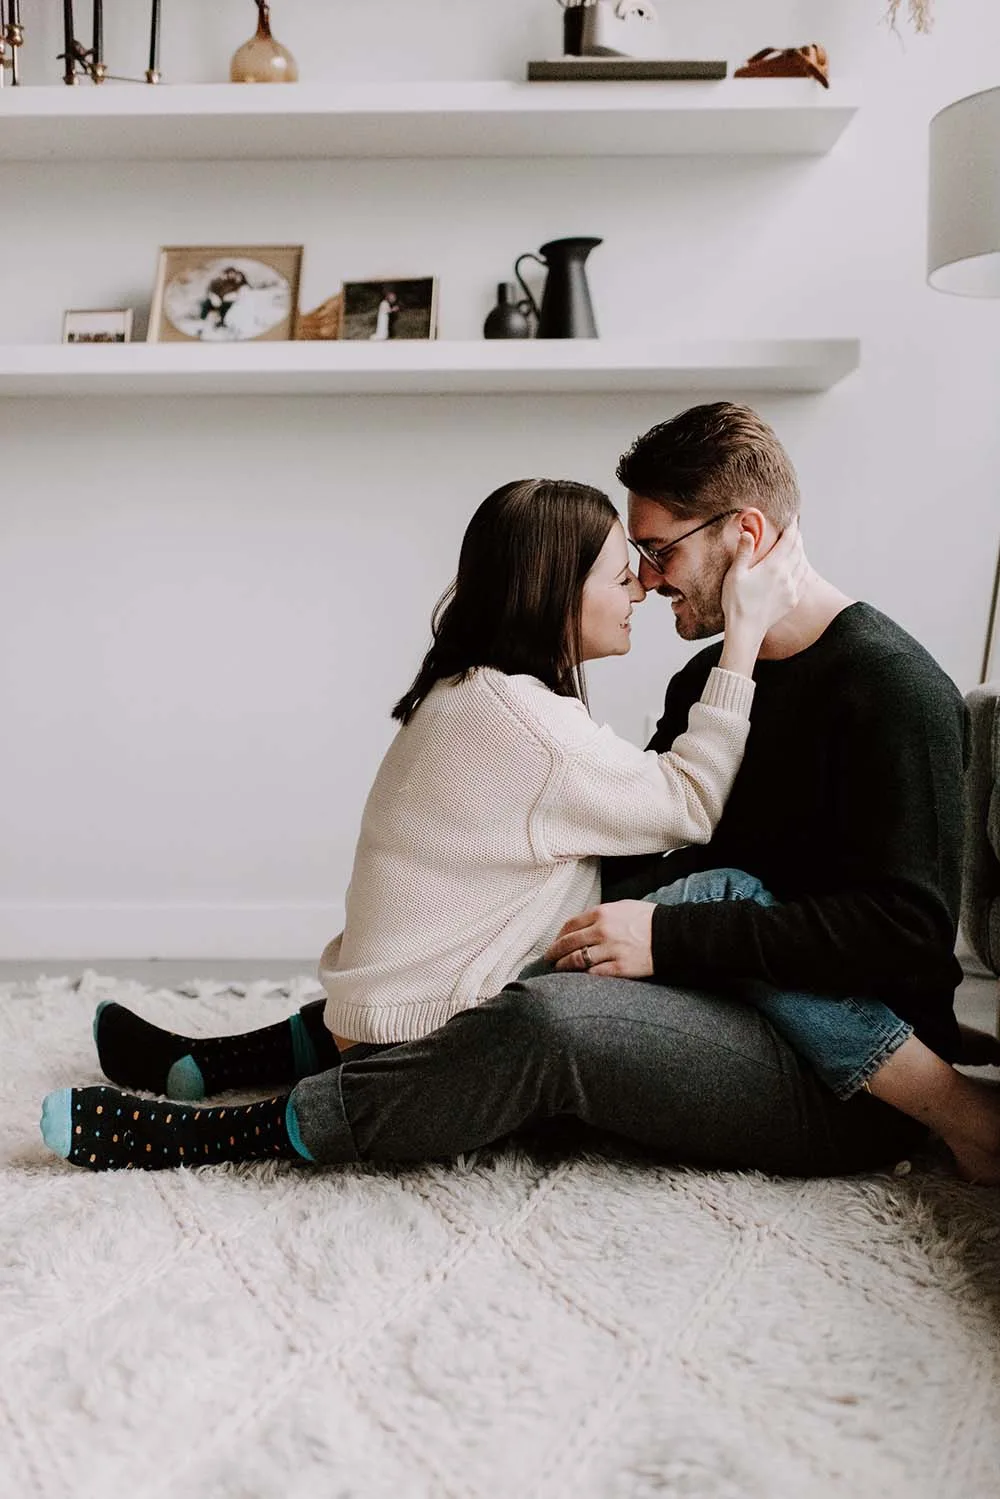 The holiday season is a busy time and it's easy to let emotions boil over into arguments. This is how you can stay connected to your husband this Christmas.